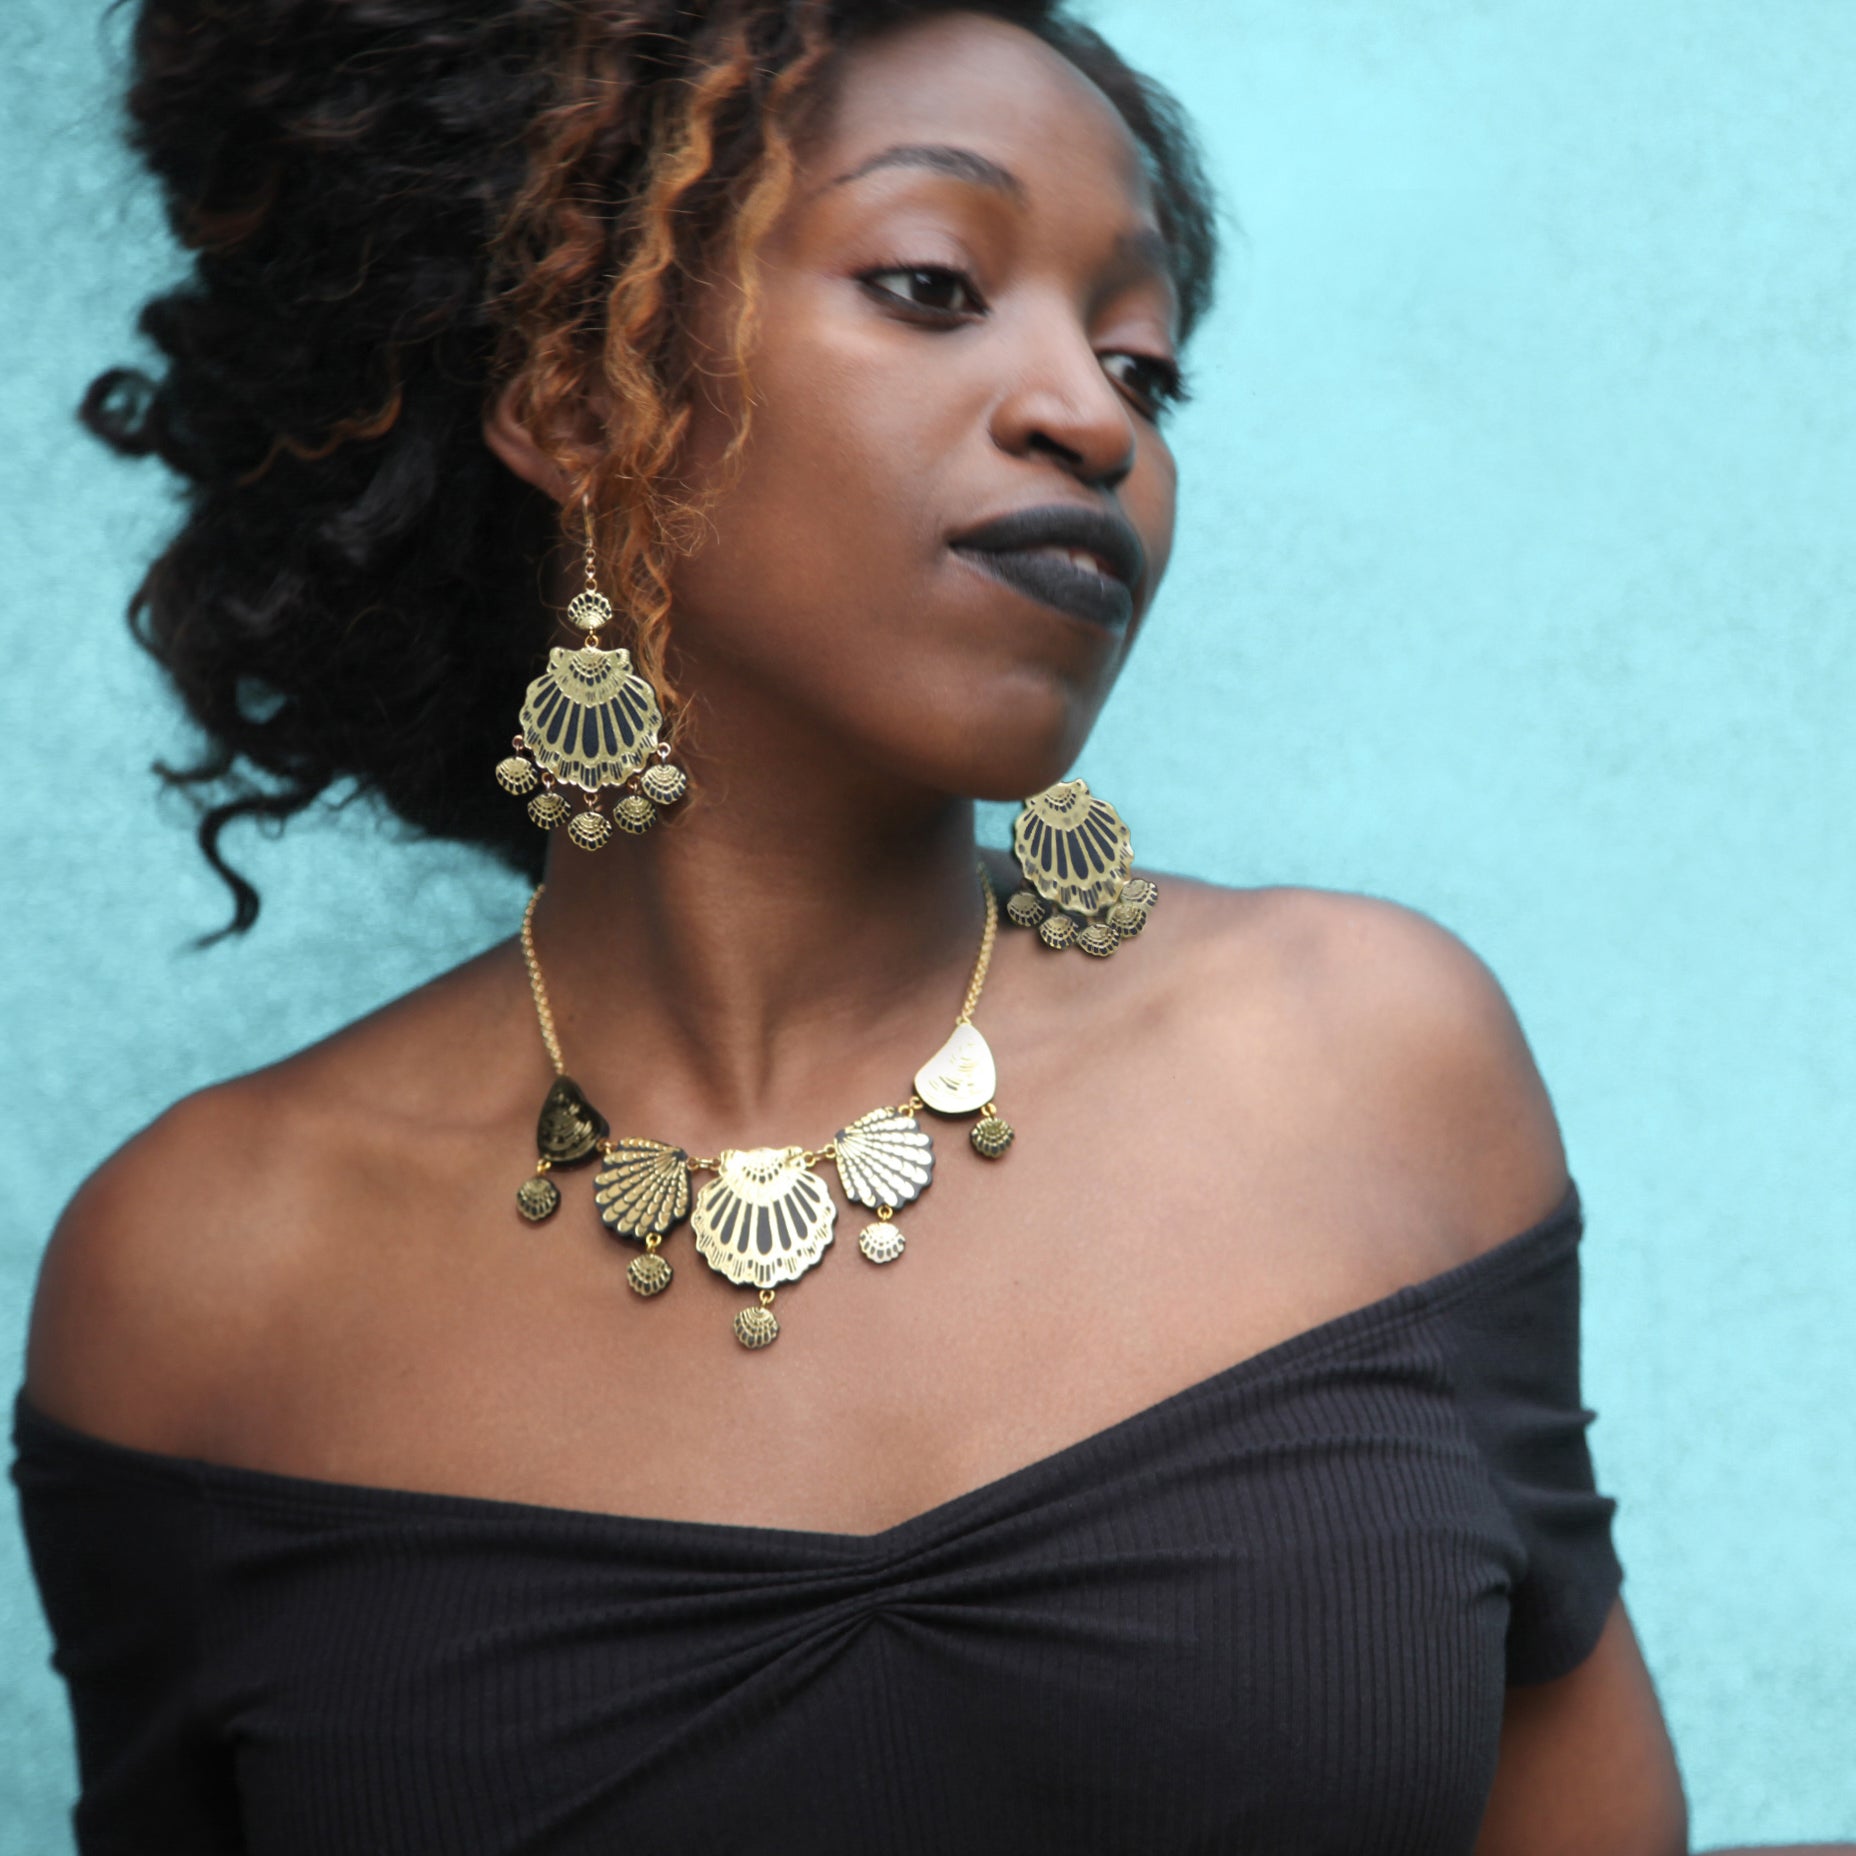 seashell chandelier earrings in black leather with gold printed detail, on model with matching seashell necklace